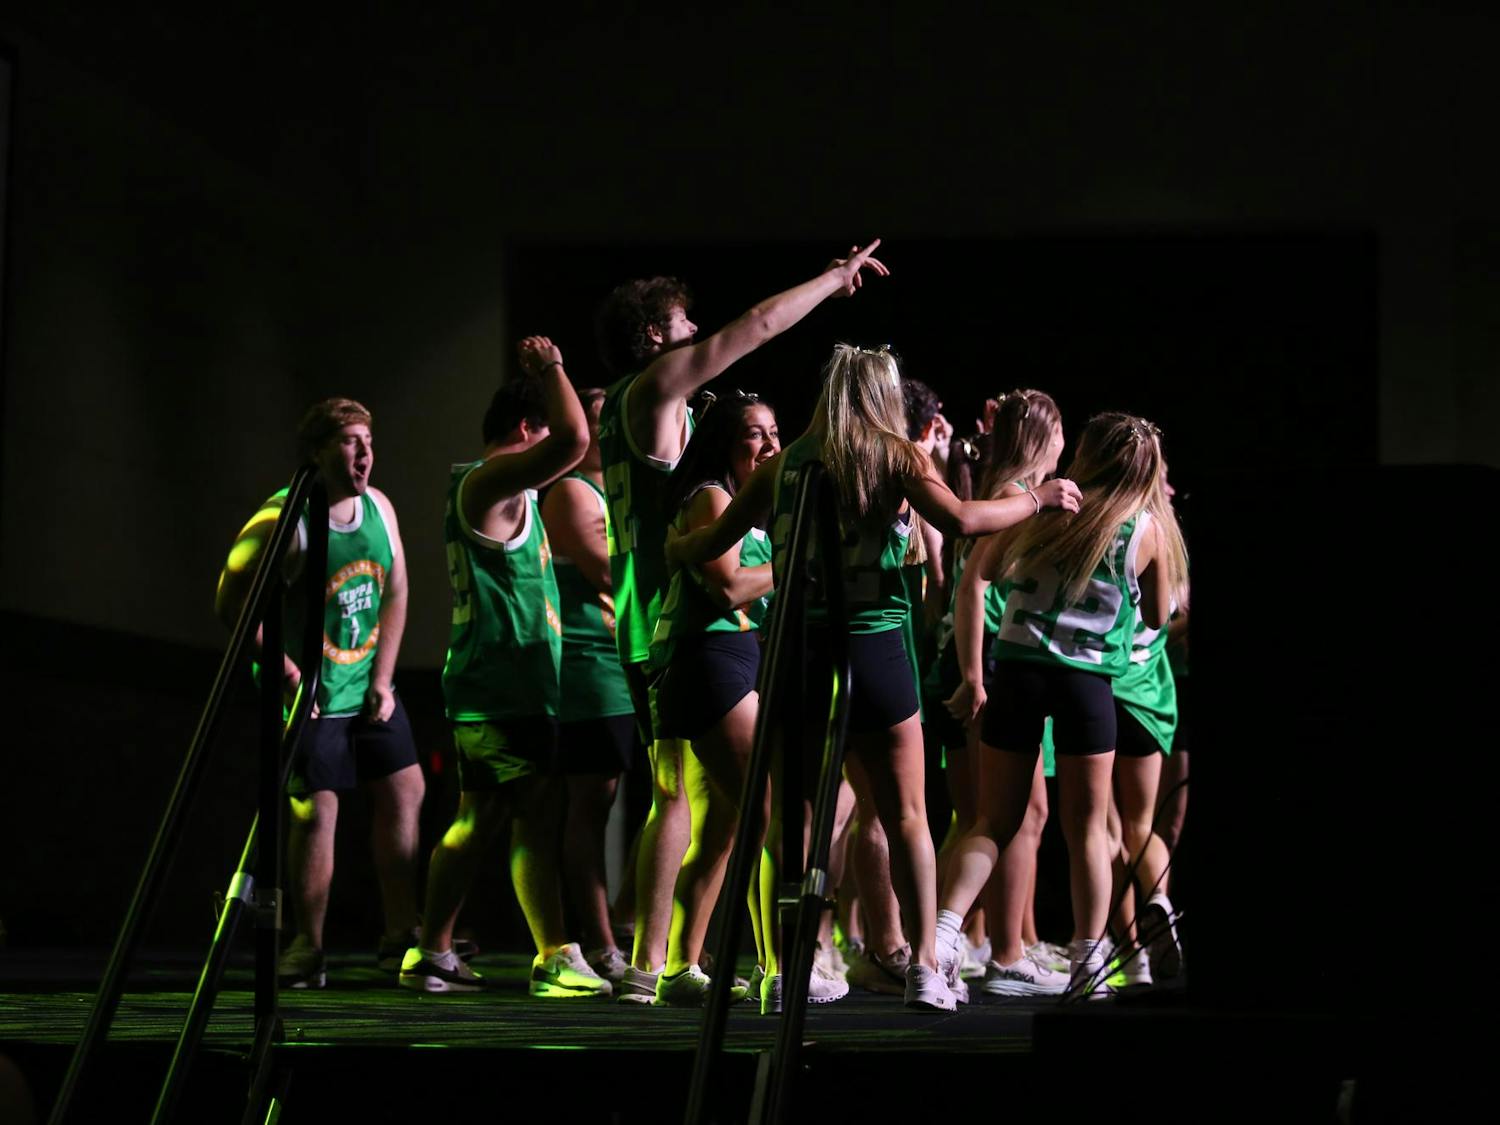 Members of Kappa Delta and Sigma Alpha Epsilon celebrate on stage during their performance at Spurs and Struts. The two Panhellenic organizations partnered together for the annual dance competition held by USC Homecoming.